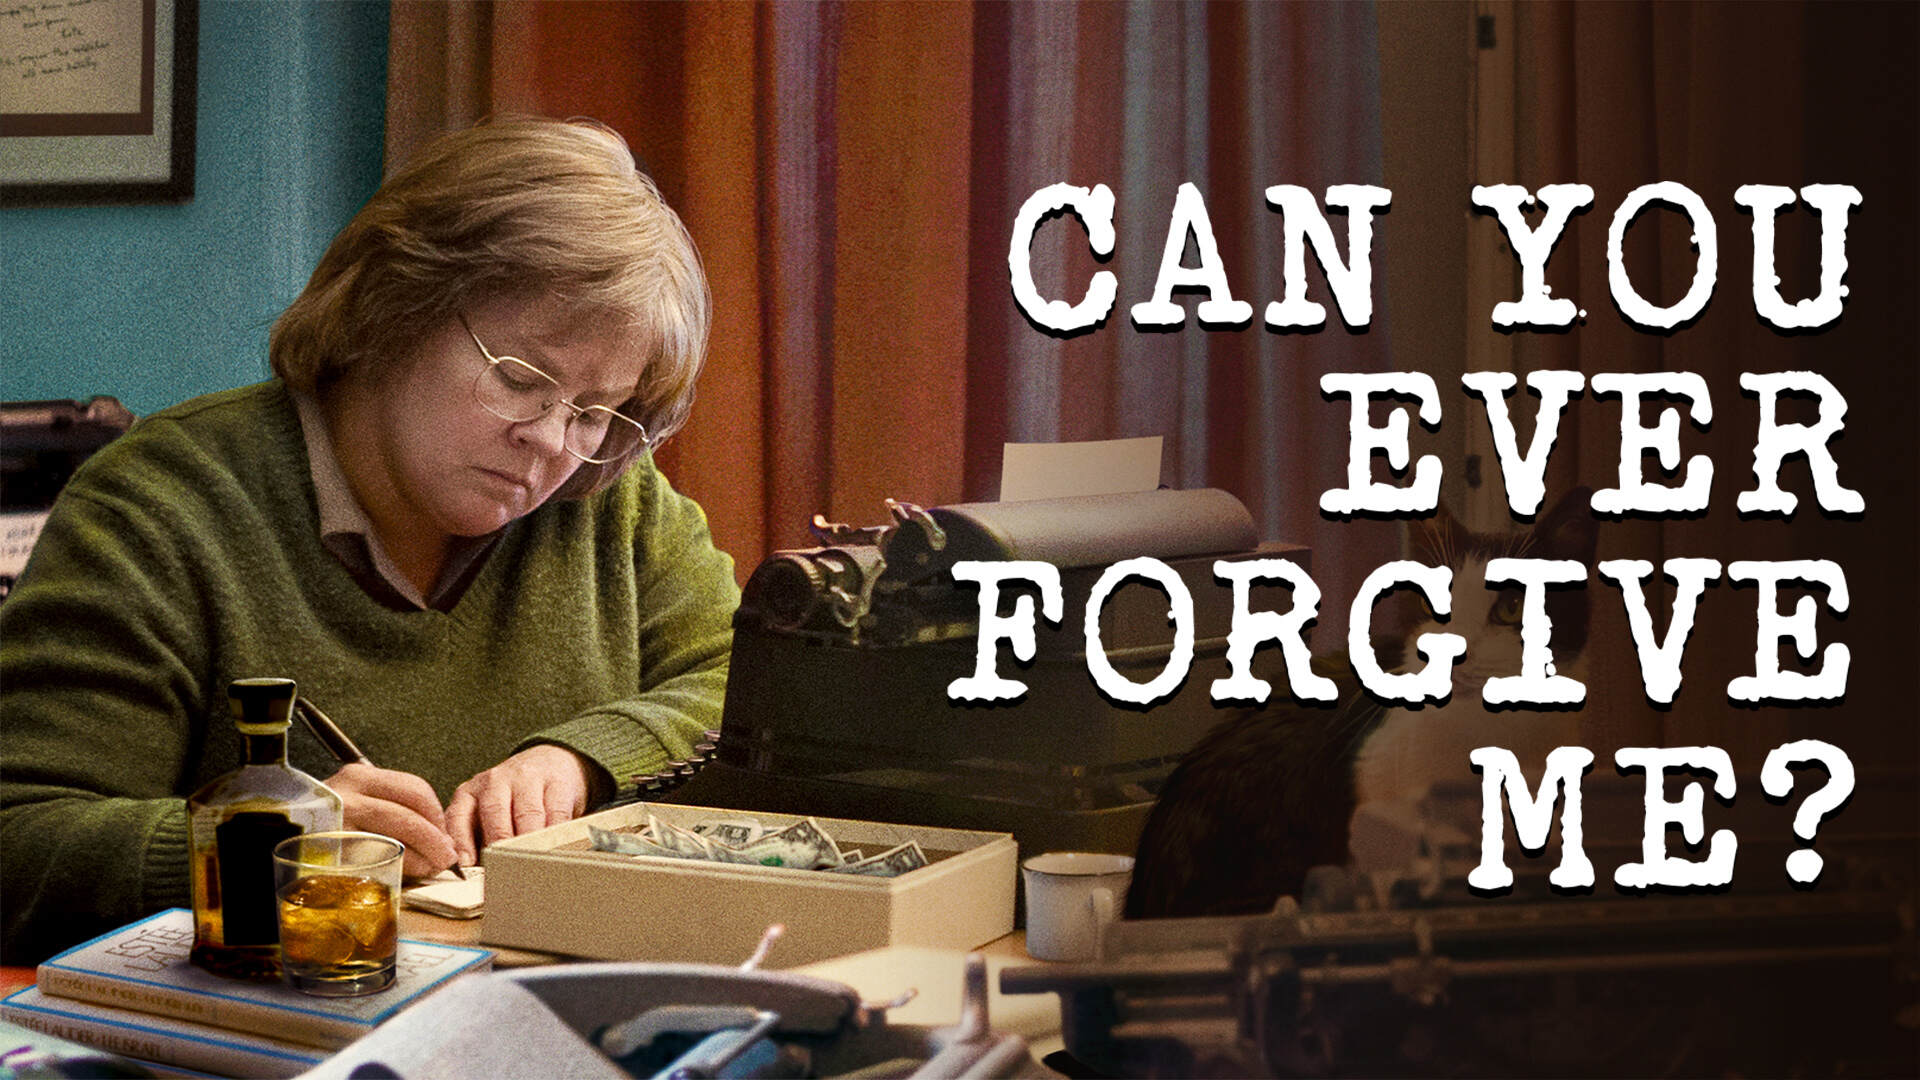 49-facts-about-the-movie-can-you-ever-forgive-me